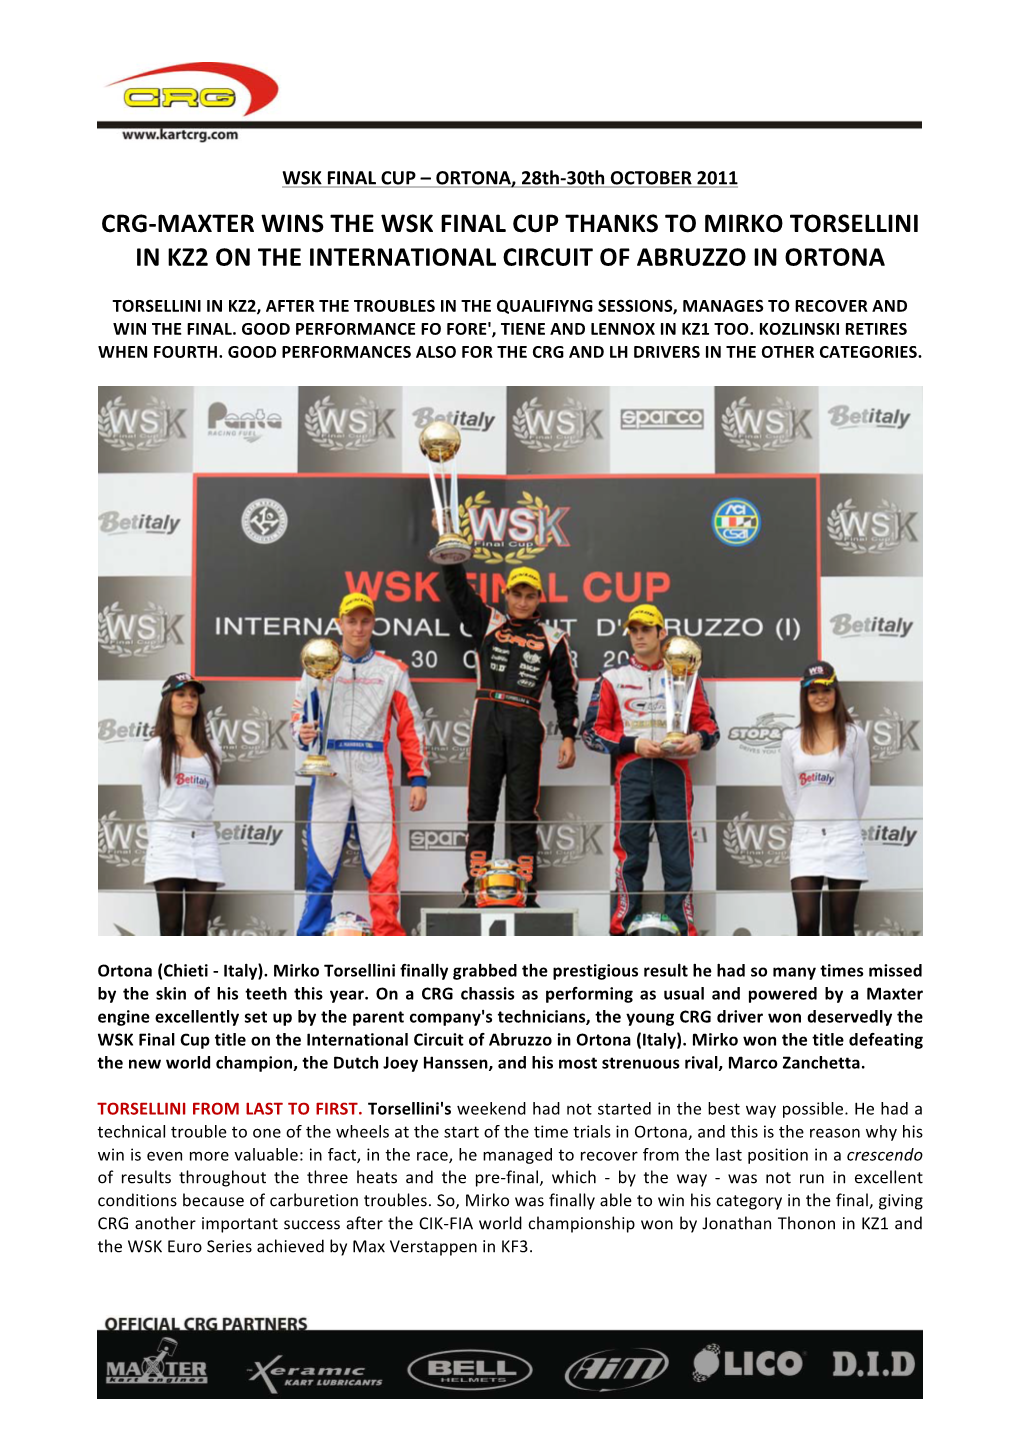 Crg-‐Maxter Wins the Wsk Final Cup Thanks to Mirko